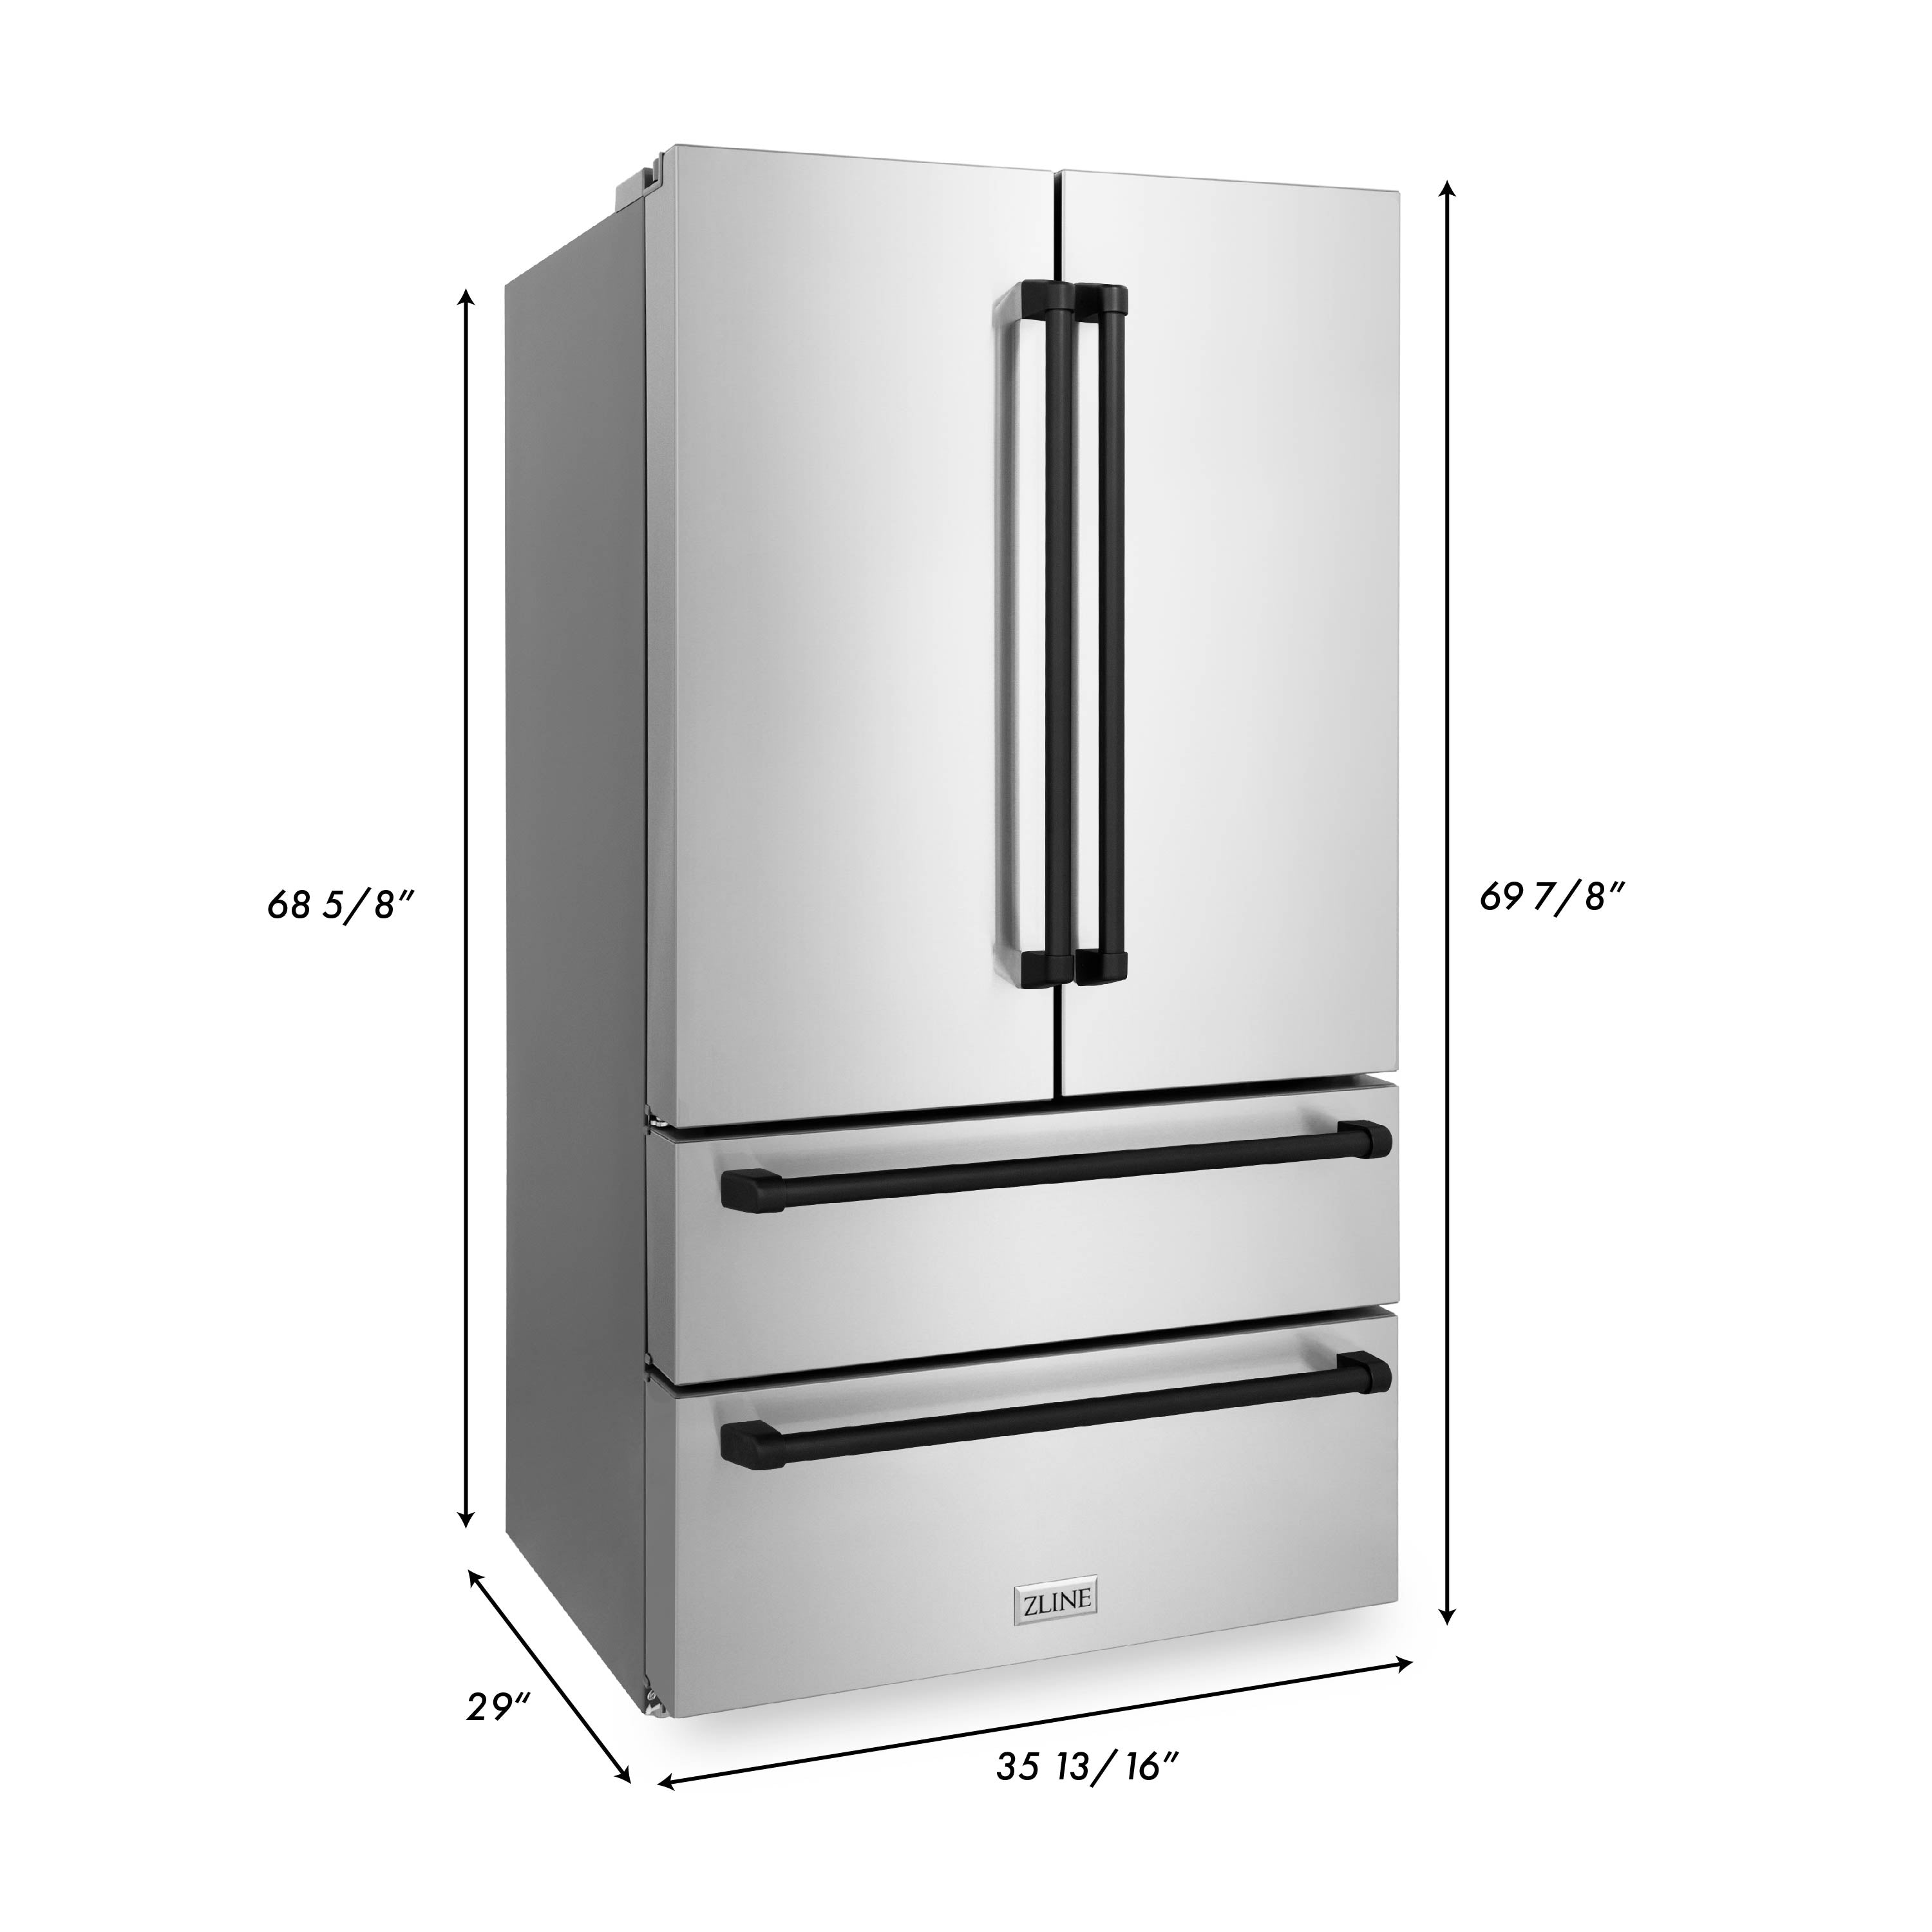 ZLINE Autograph Edition 36 in. Kitchen Package with Stainless Steel Dual Fuel Range, Range Hood, Dishwasher and Refrigerator with Matte Black Accents (4KAPR-RARHDWM36-MB) dimensional diagram with measurements.